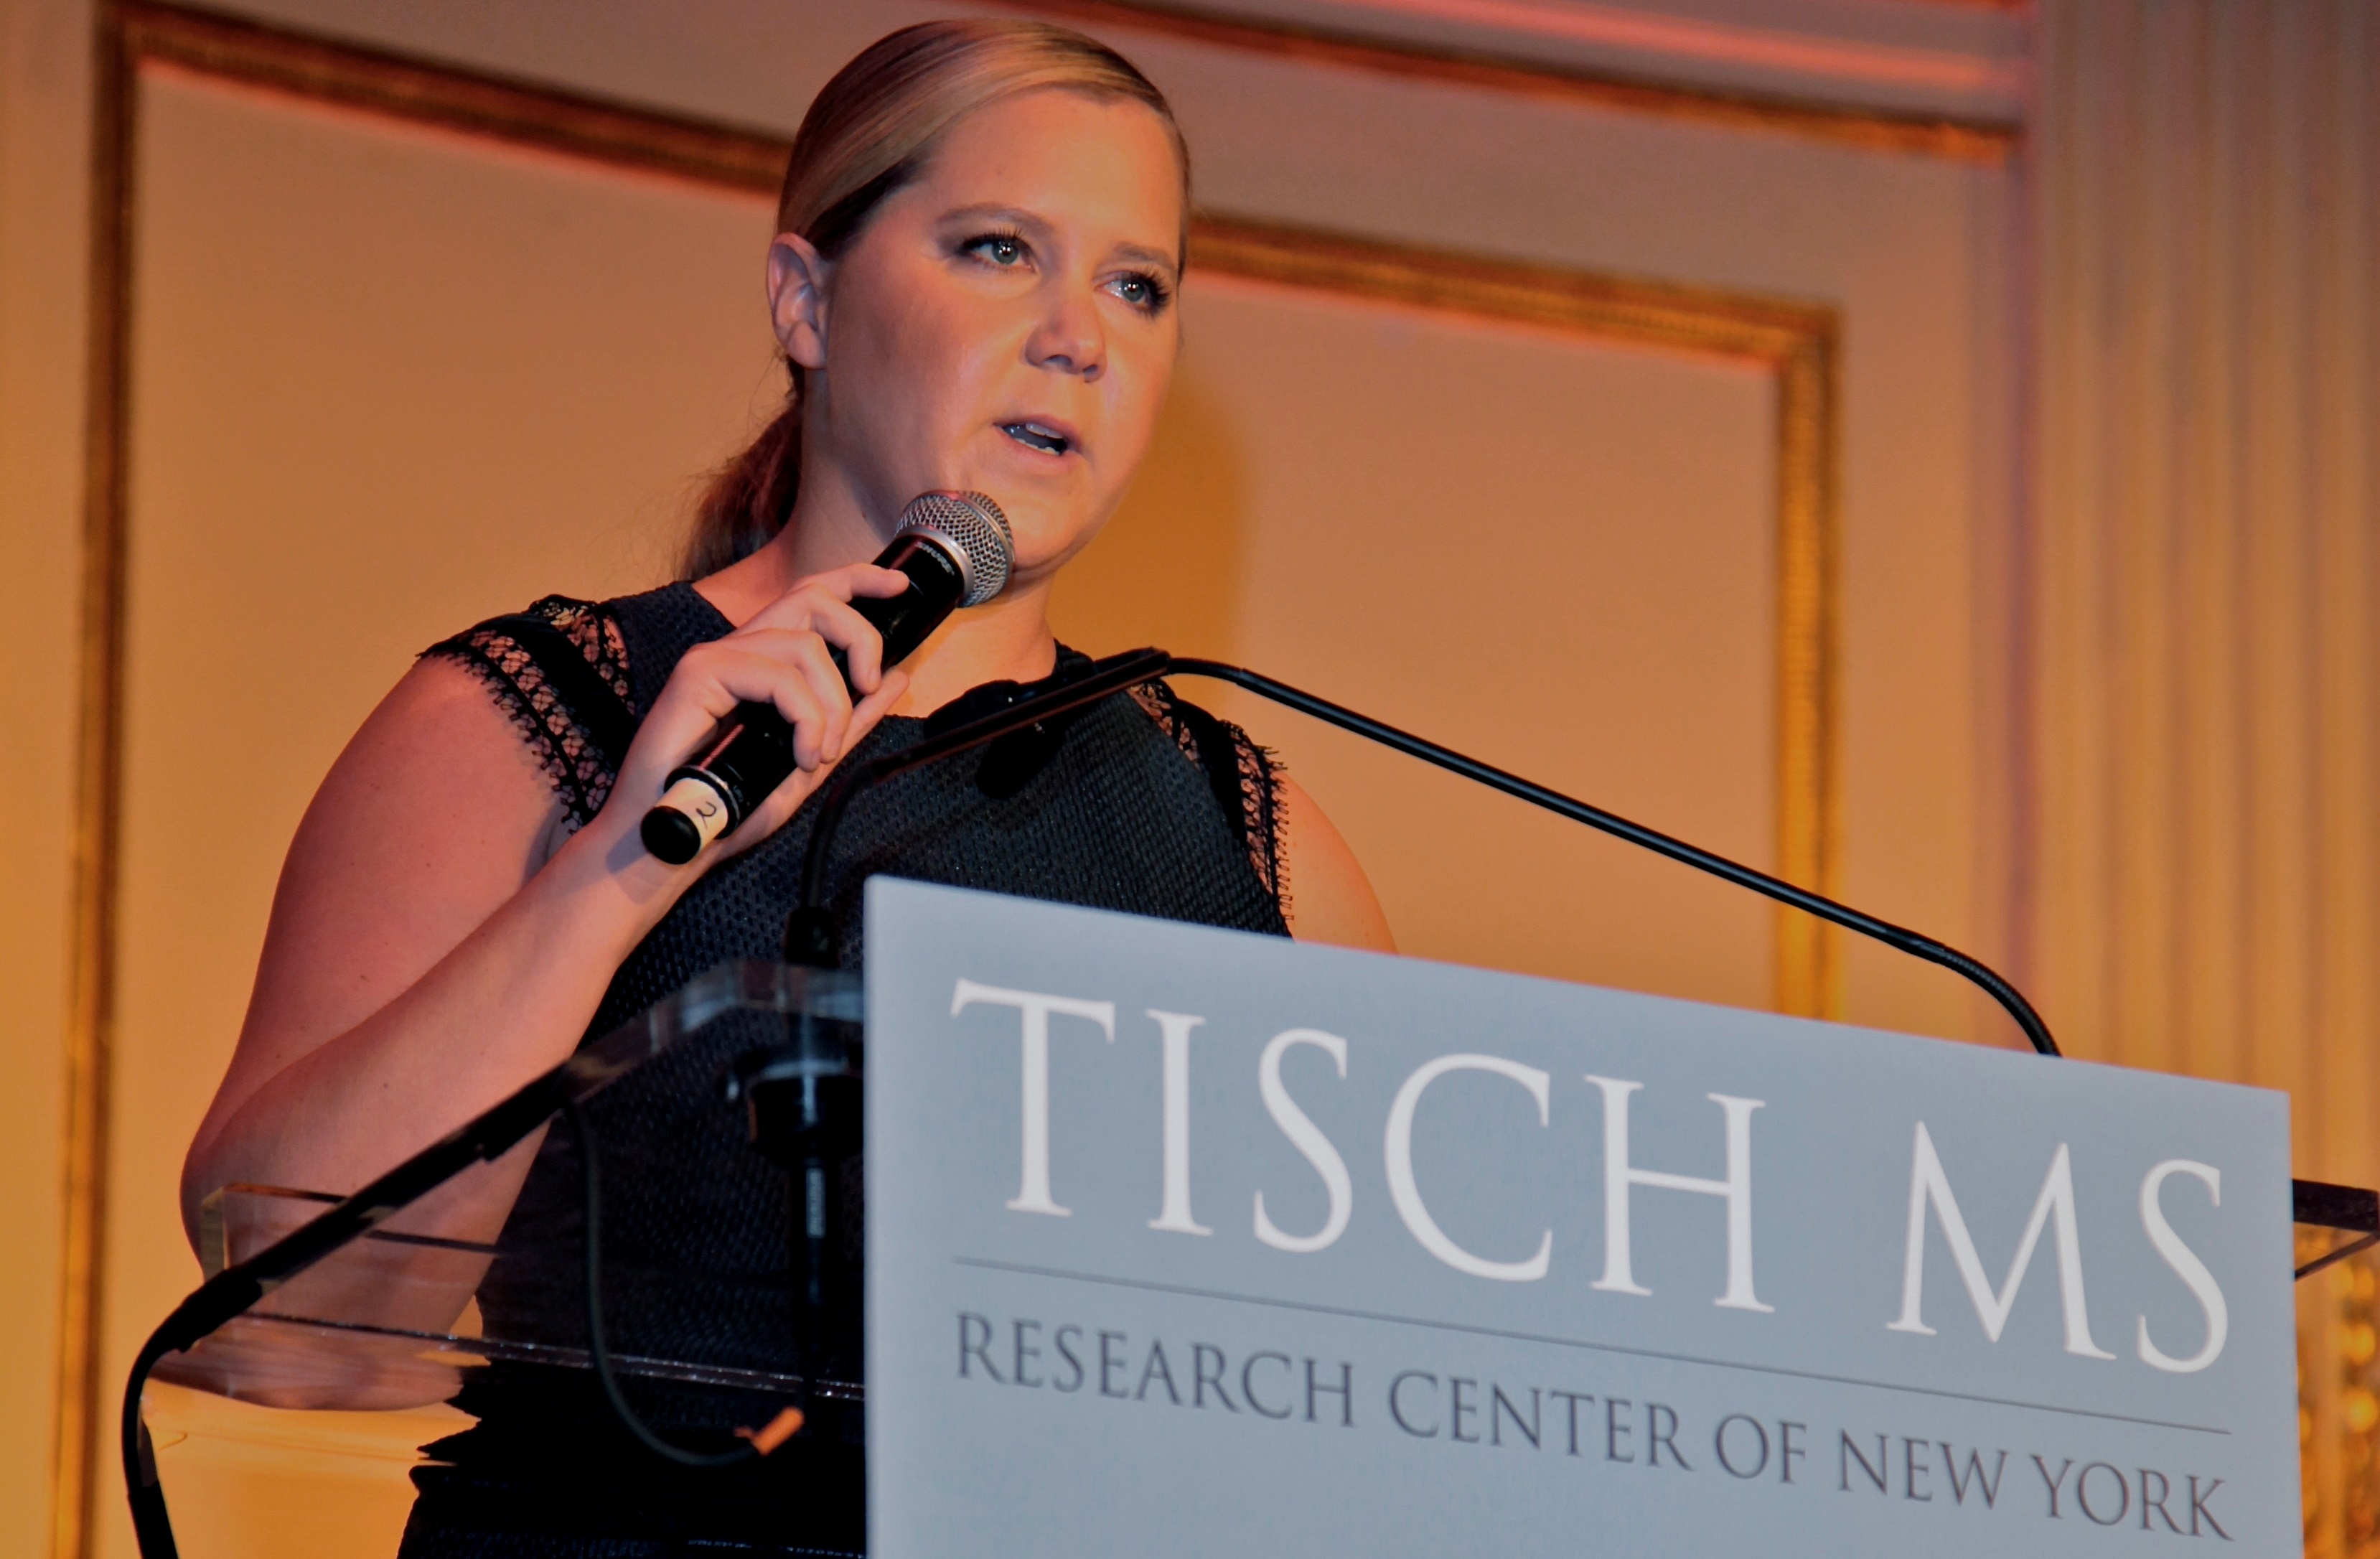 AMY SCHUMER AND PAUL SHAFFER JOIN FORCES TO RAISE $2.5 MILLION FOR MS RESEARCH